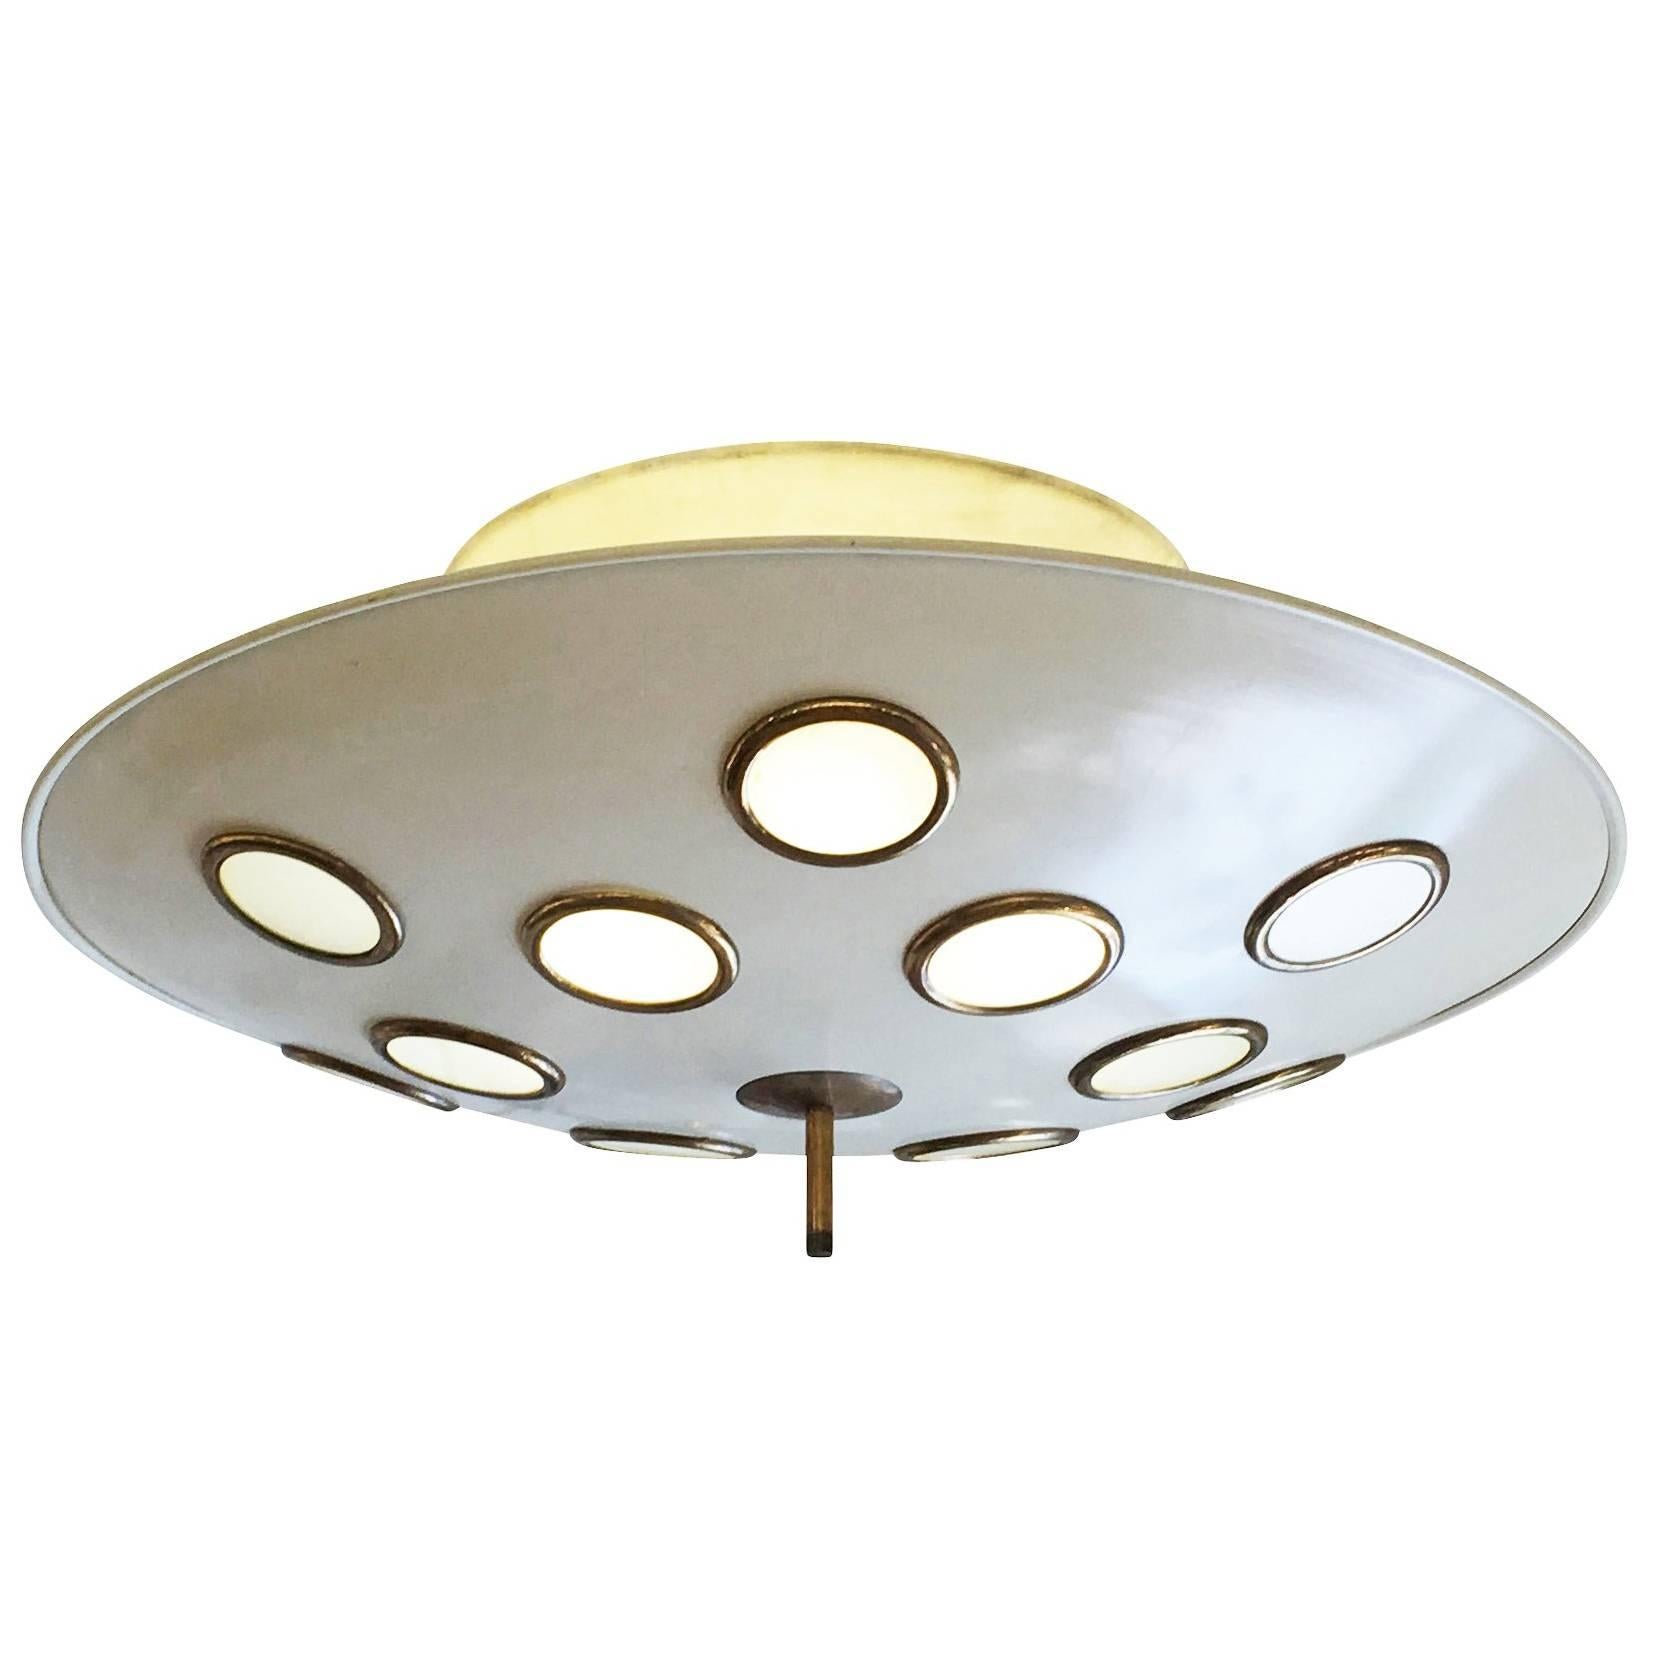 Saucer Flush Mount Chandelier Attributed to Arredoluce, Italy, 1950s